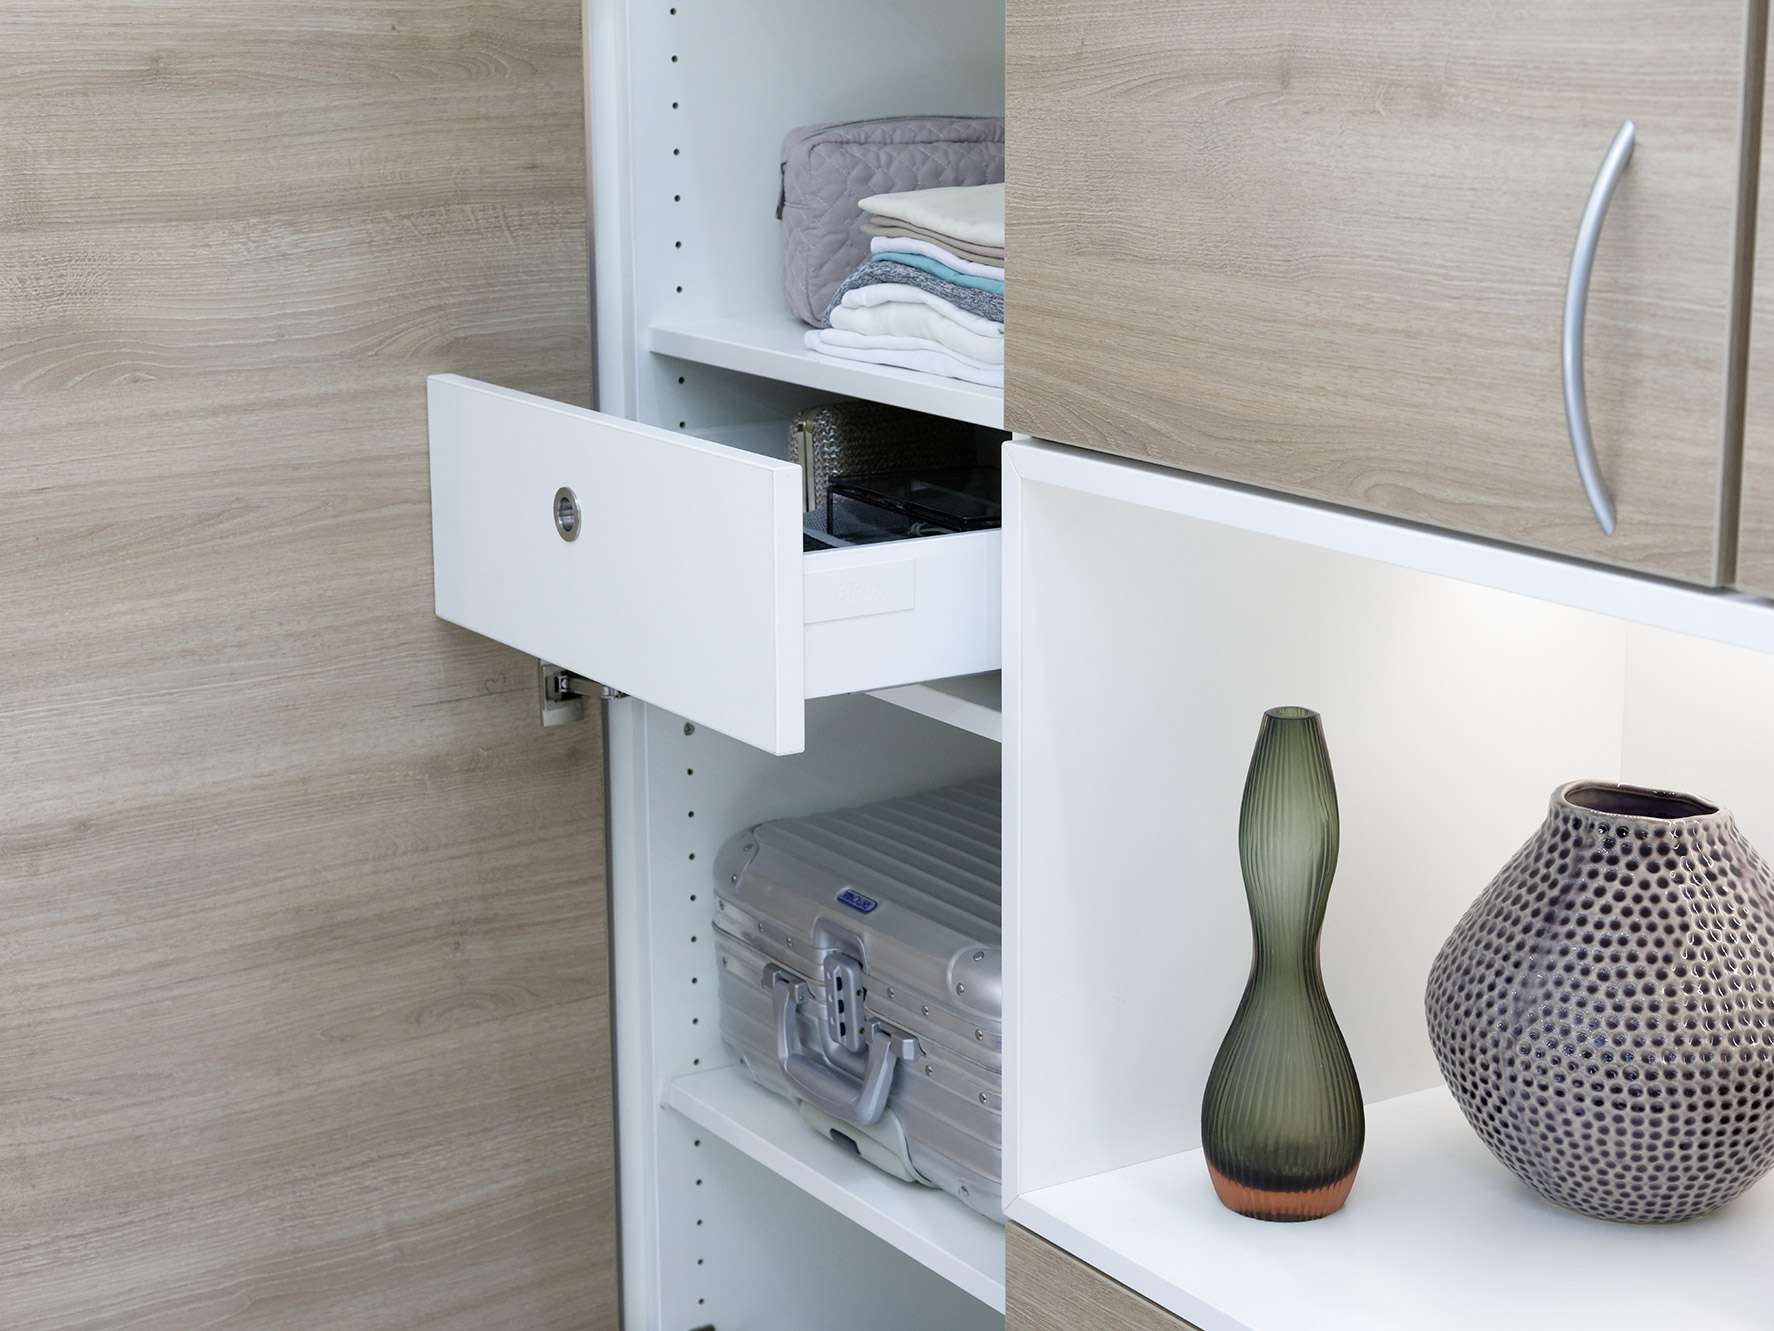 Flexible storage space with the Adrano range of furniture